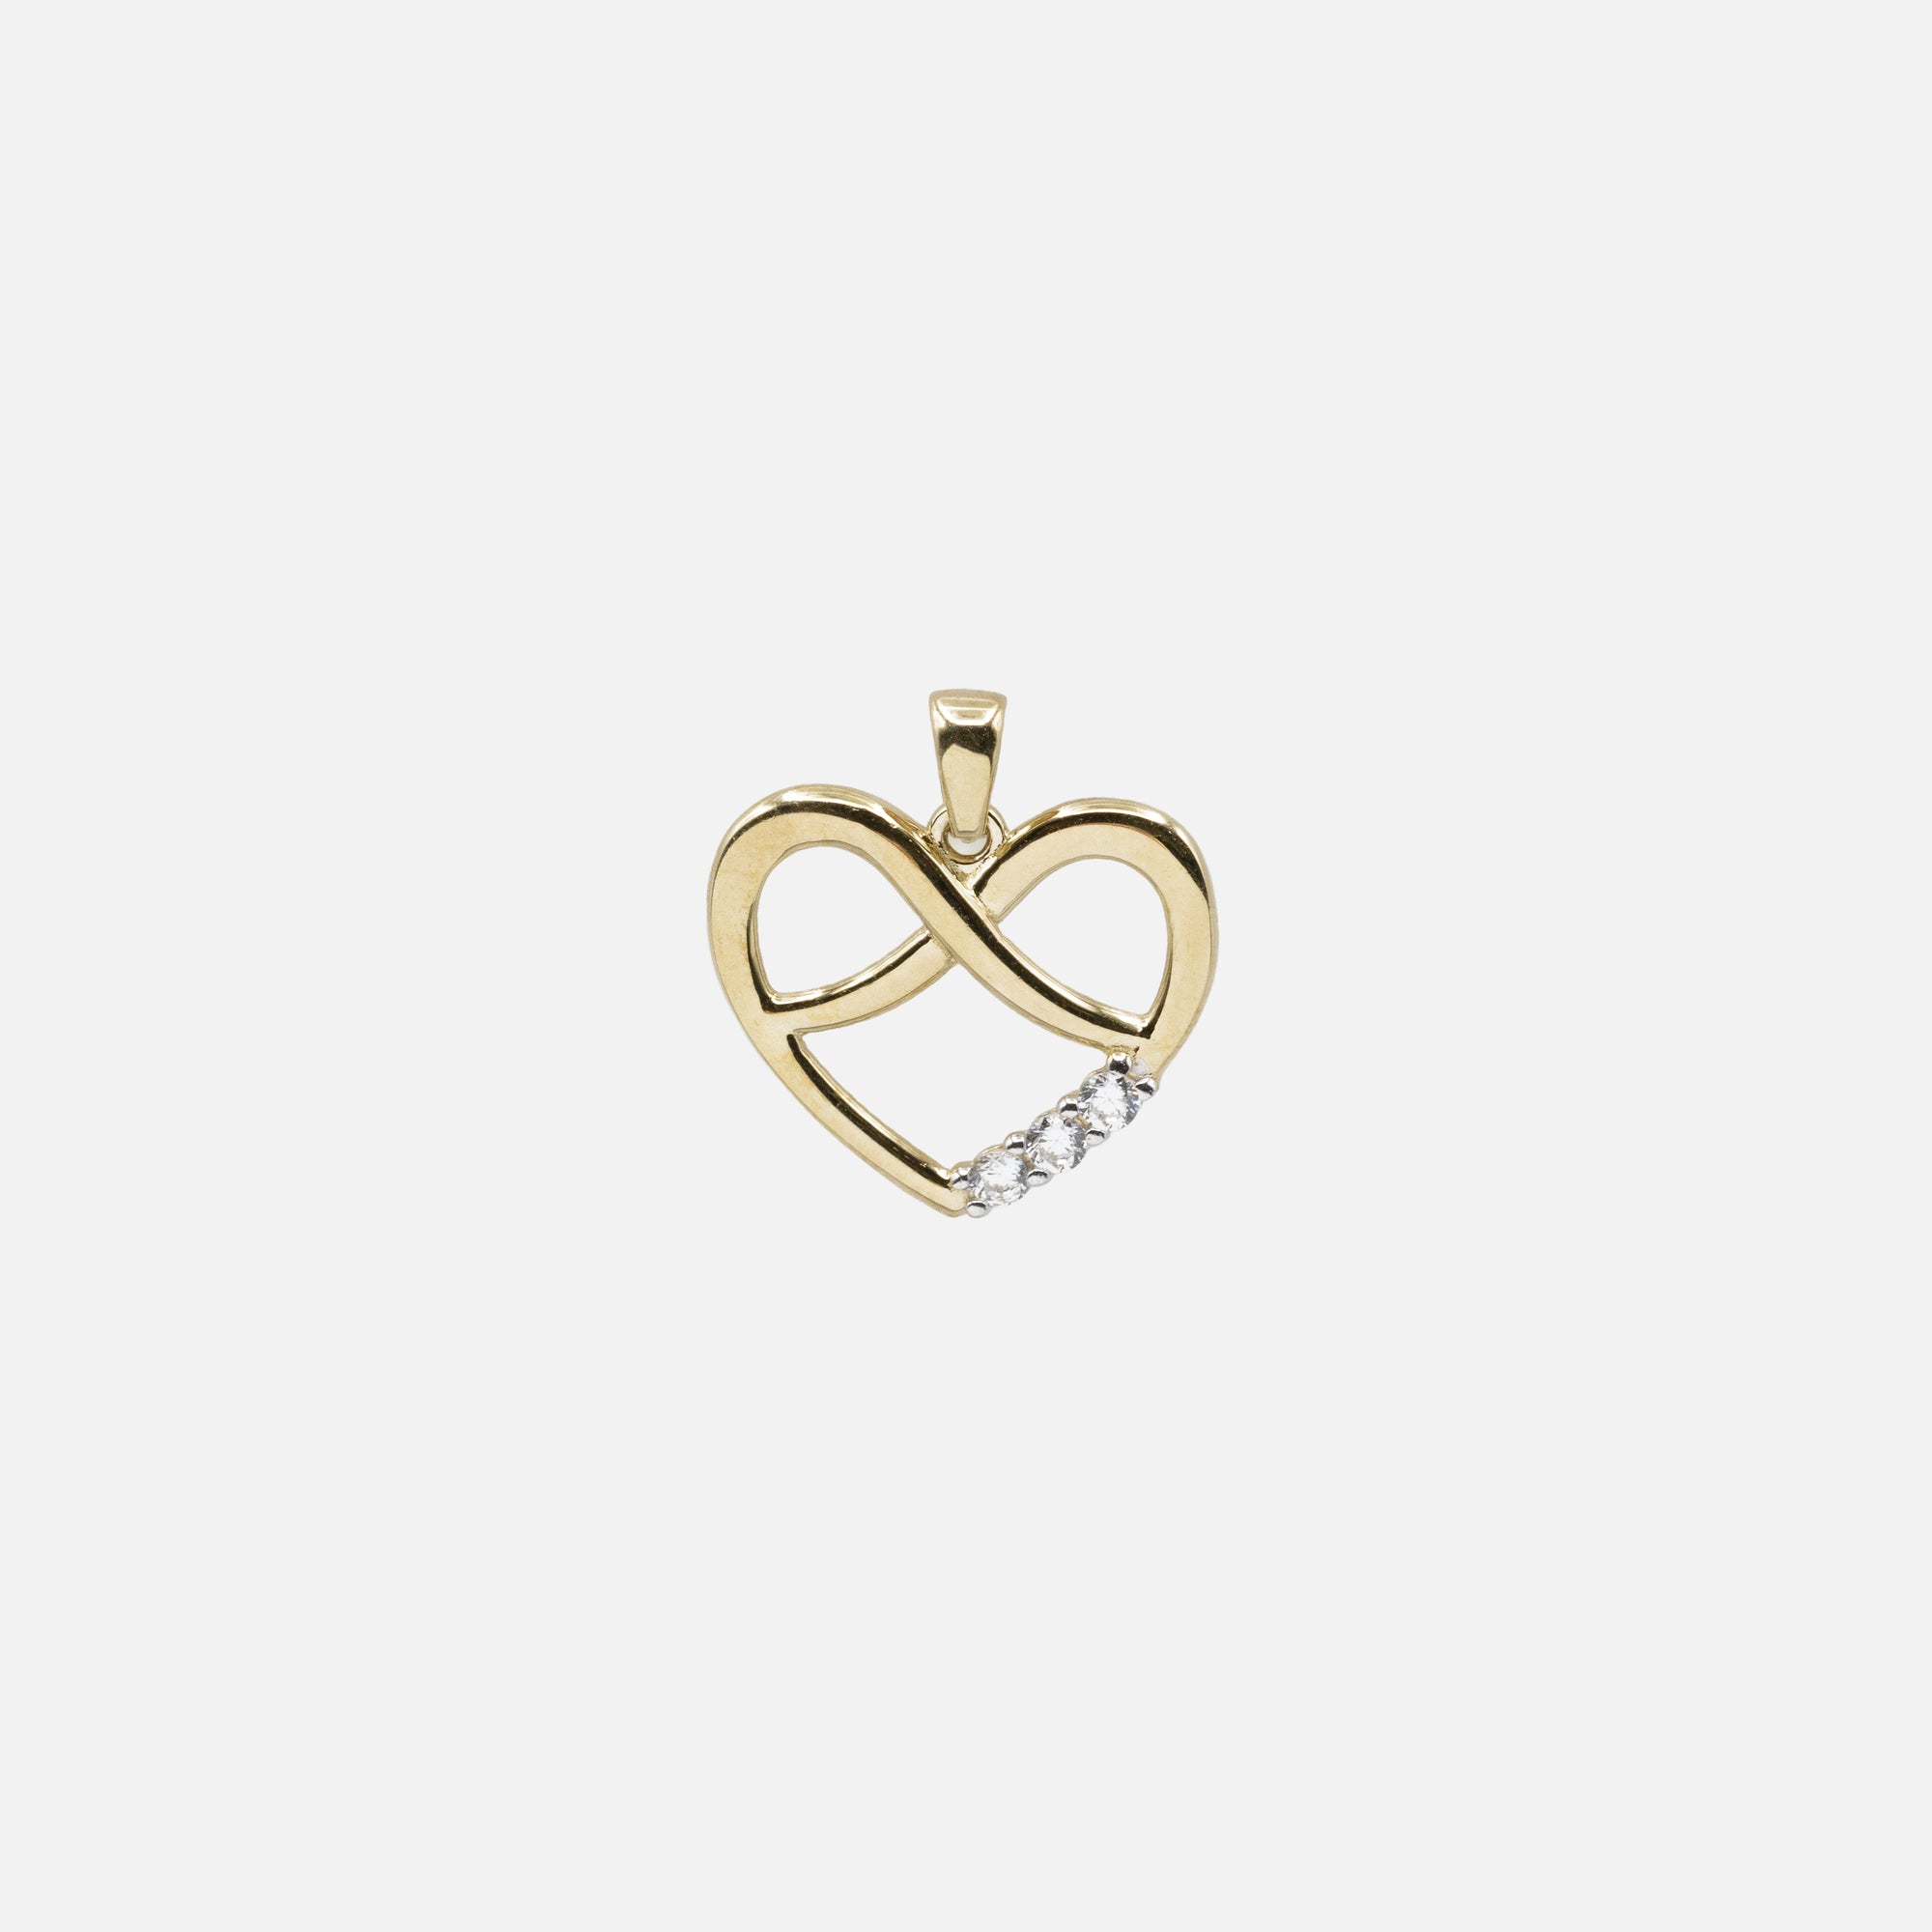 Gold Heart Charm and Trio of Cubic Zirconia in 10k Gold